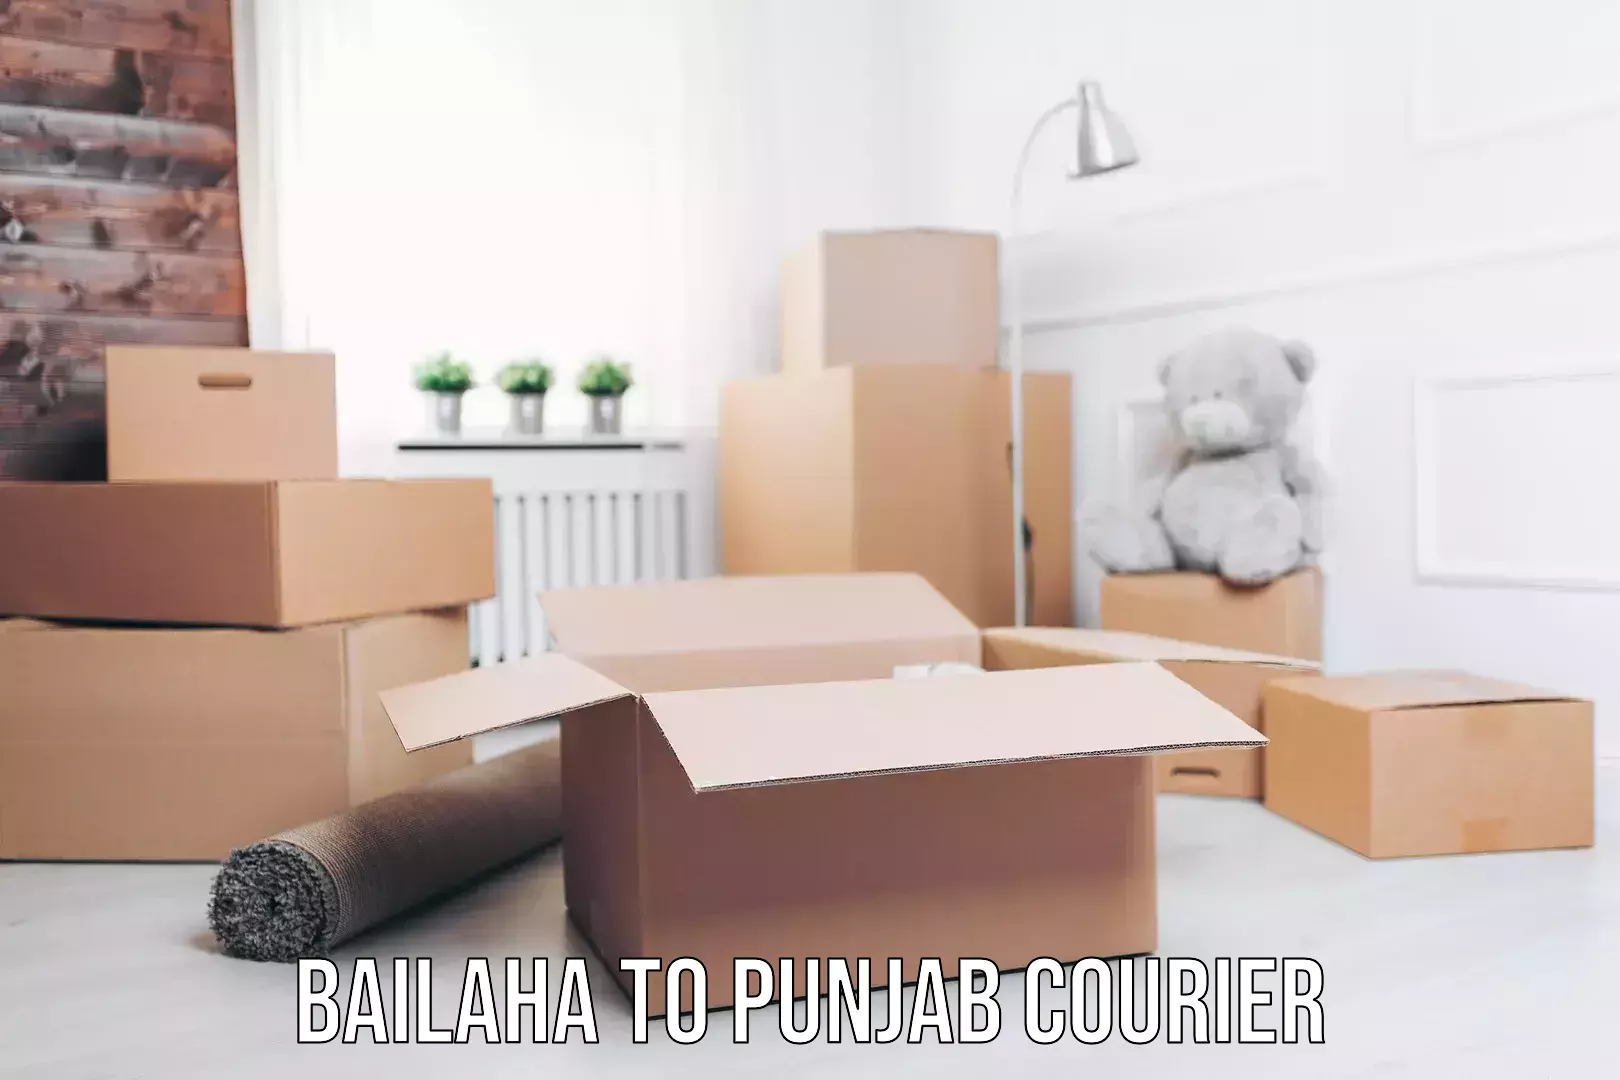 Speedy delivery service in Bailaha to Punjab